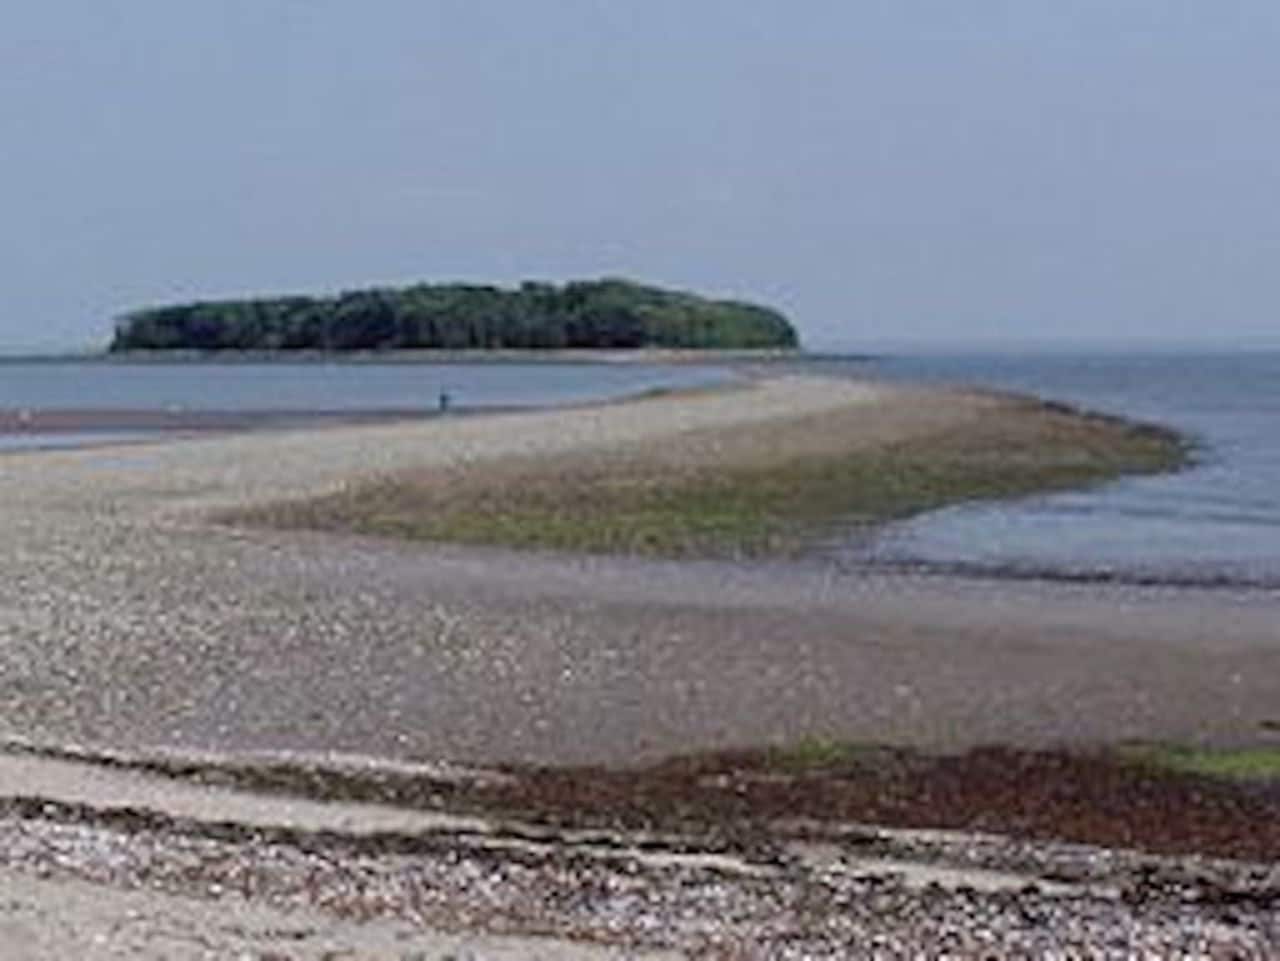 Bones found along the shoreline at Silver Sands State Park have been determined to be animal bones.